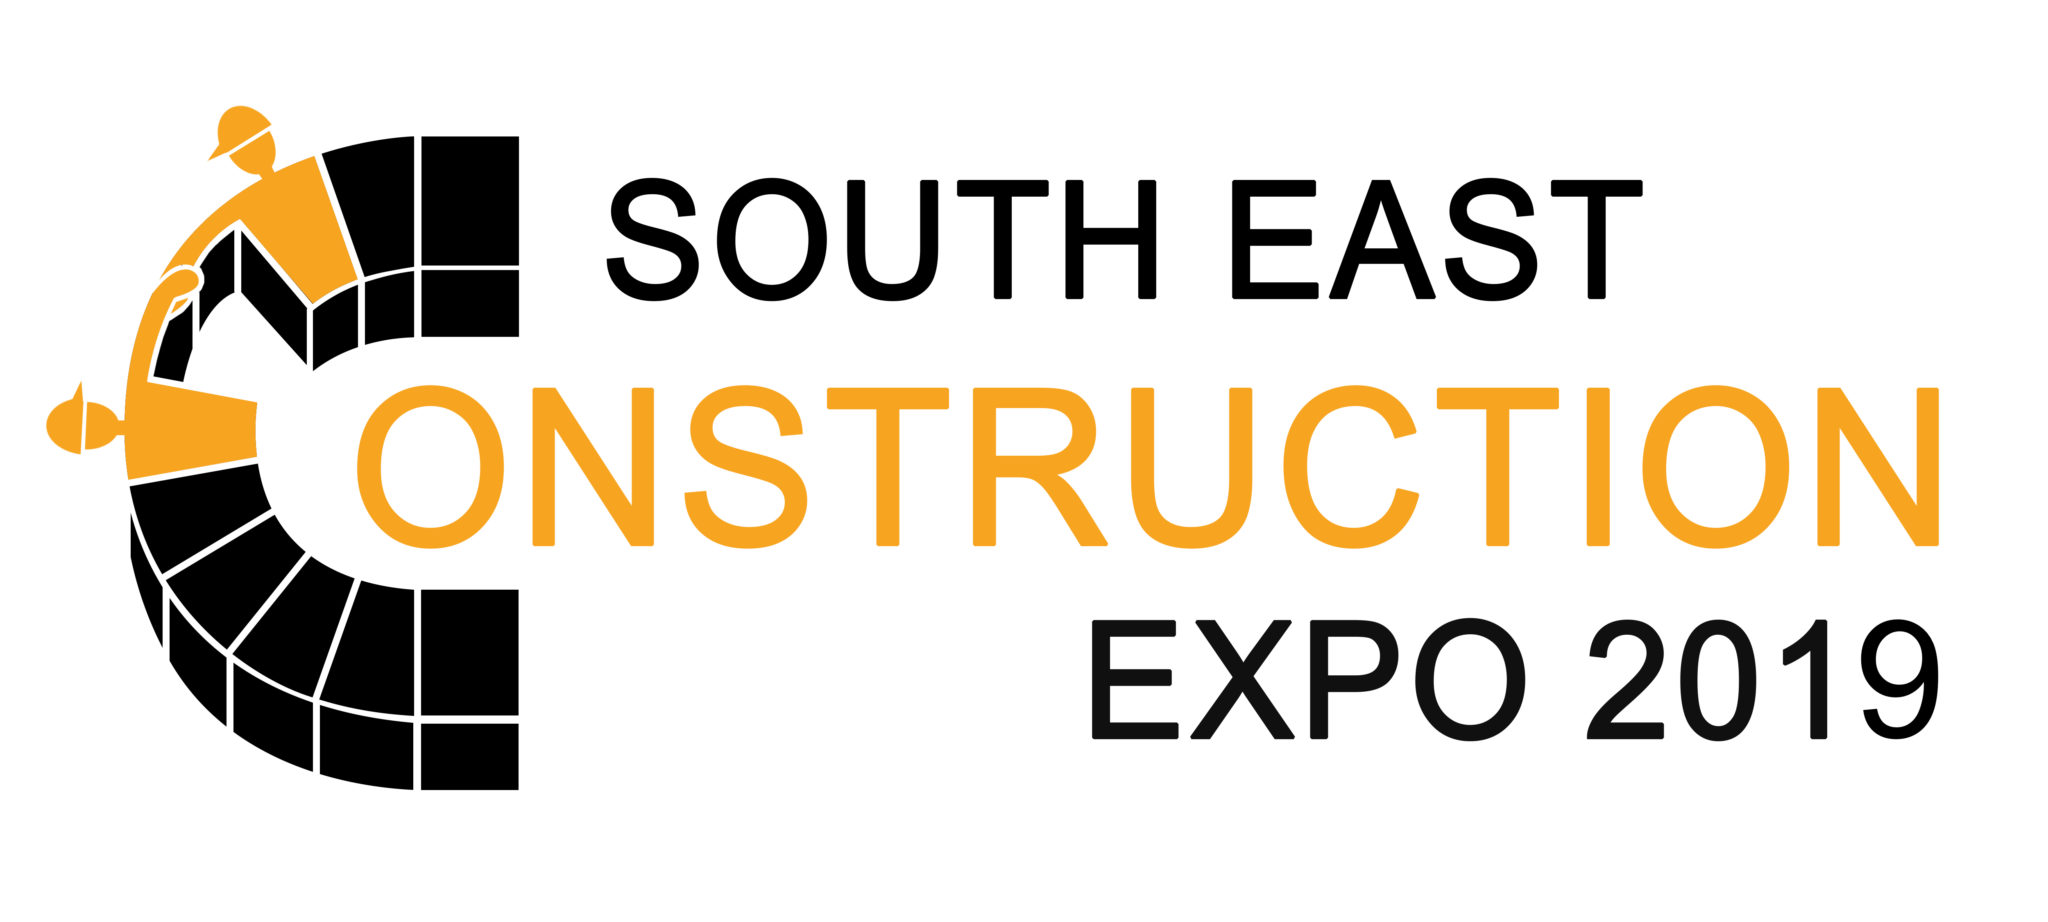 South East Construction Expo 2019 offers construction industry insight into surviving new challenges @ConstructExpo